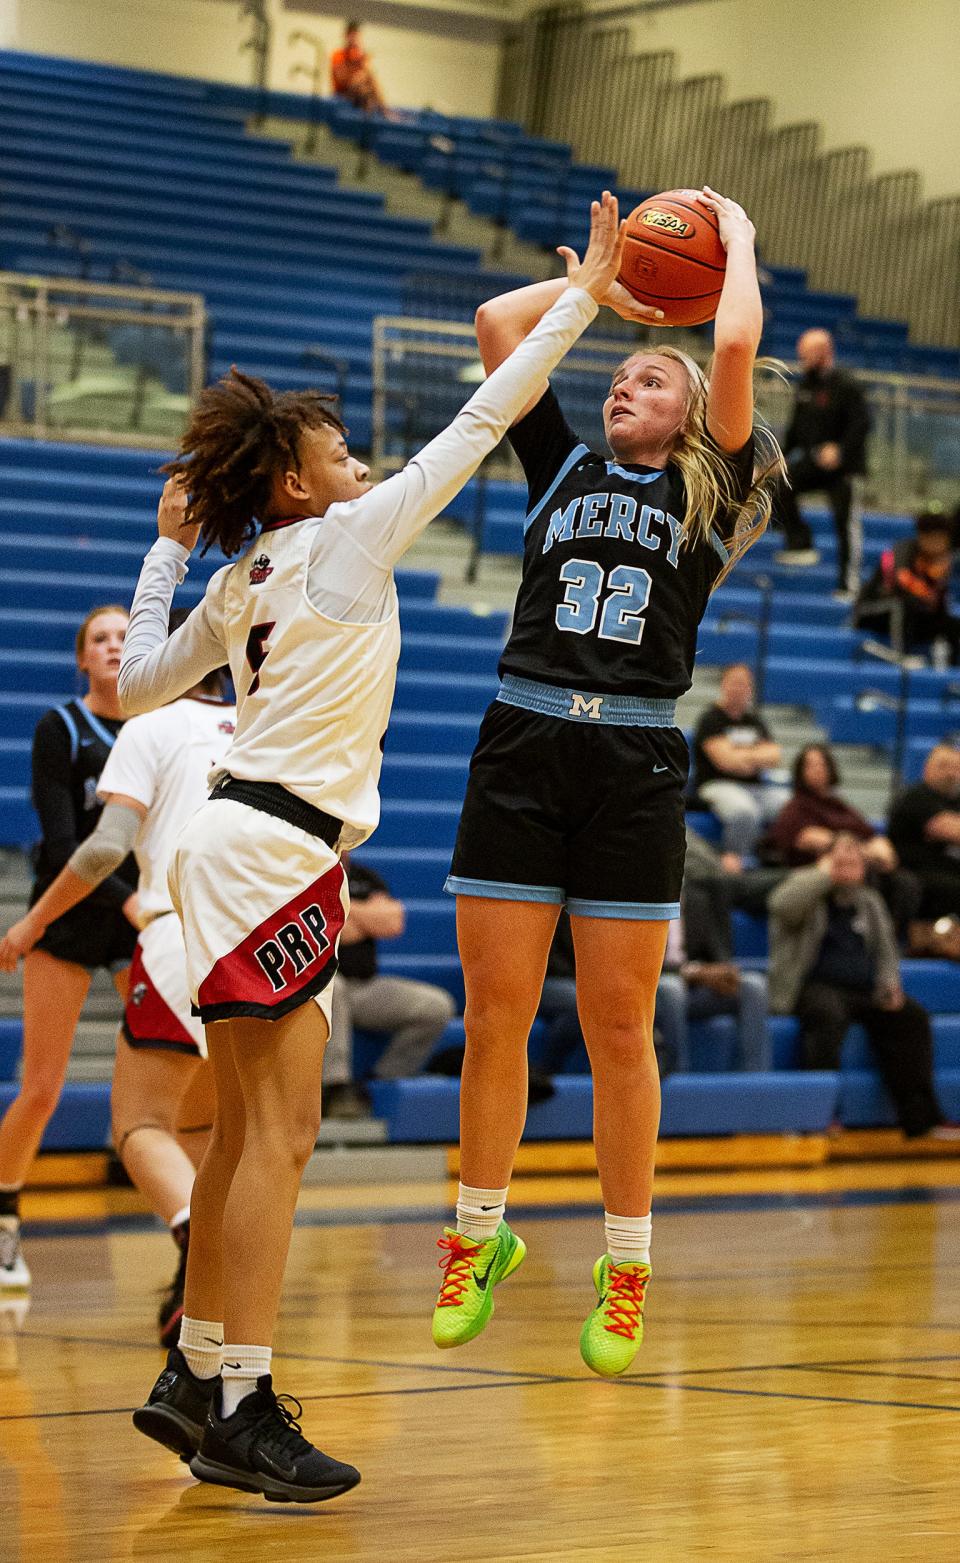 Mercy's Alyssa Murphy dropped in two of her 8 points against the PRP defense during the 6th Region Girls semifinal at Valley High School. The Mercy Jaguars defeated the PRP Panthers, 75-44. March 3, 2022